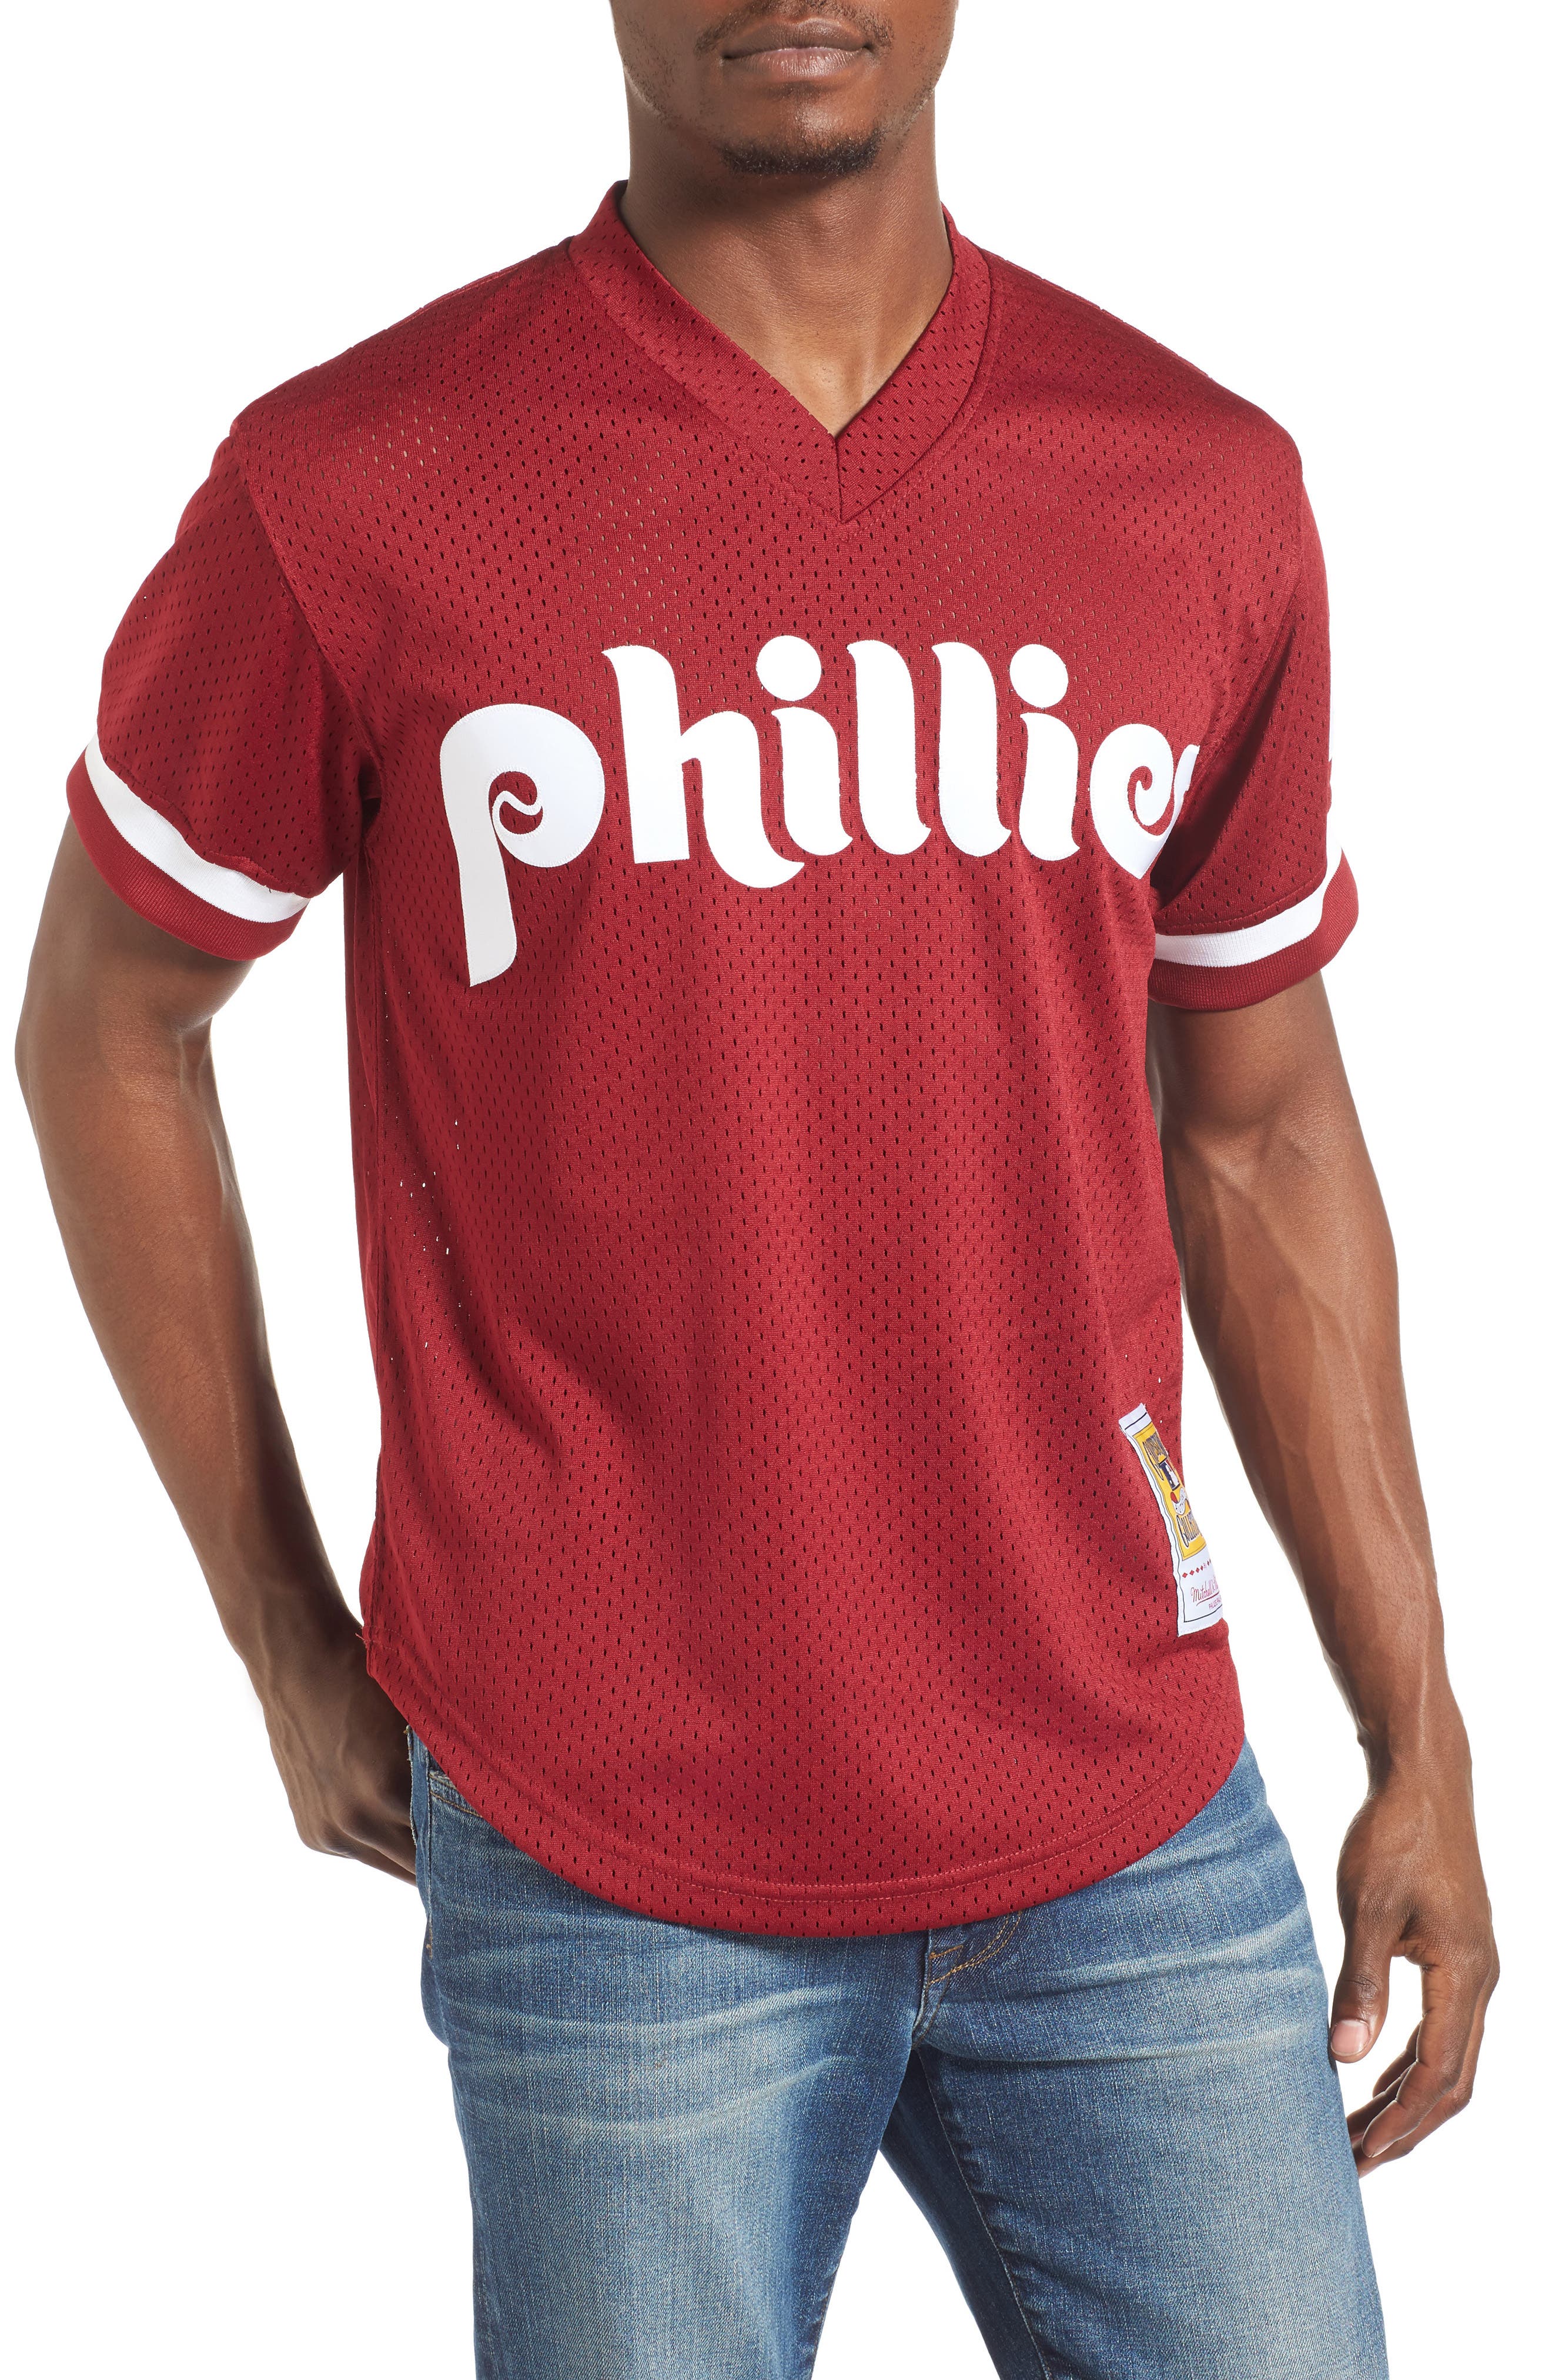 phillies mitchell and ness jersey